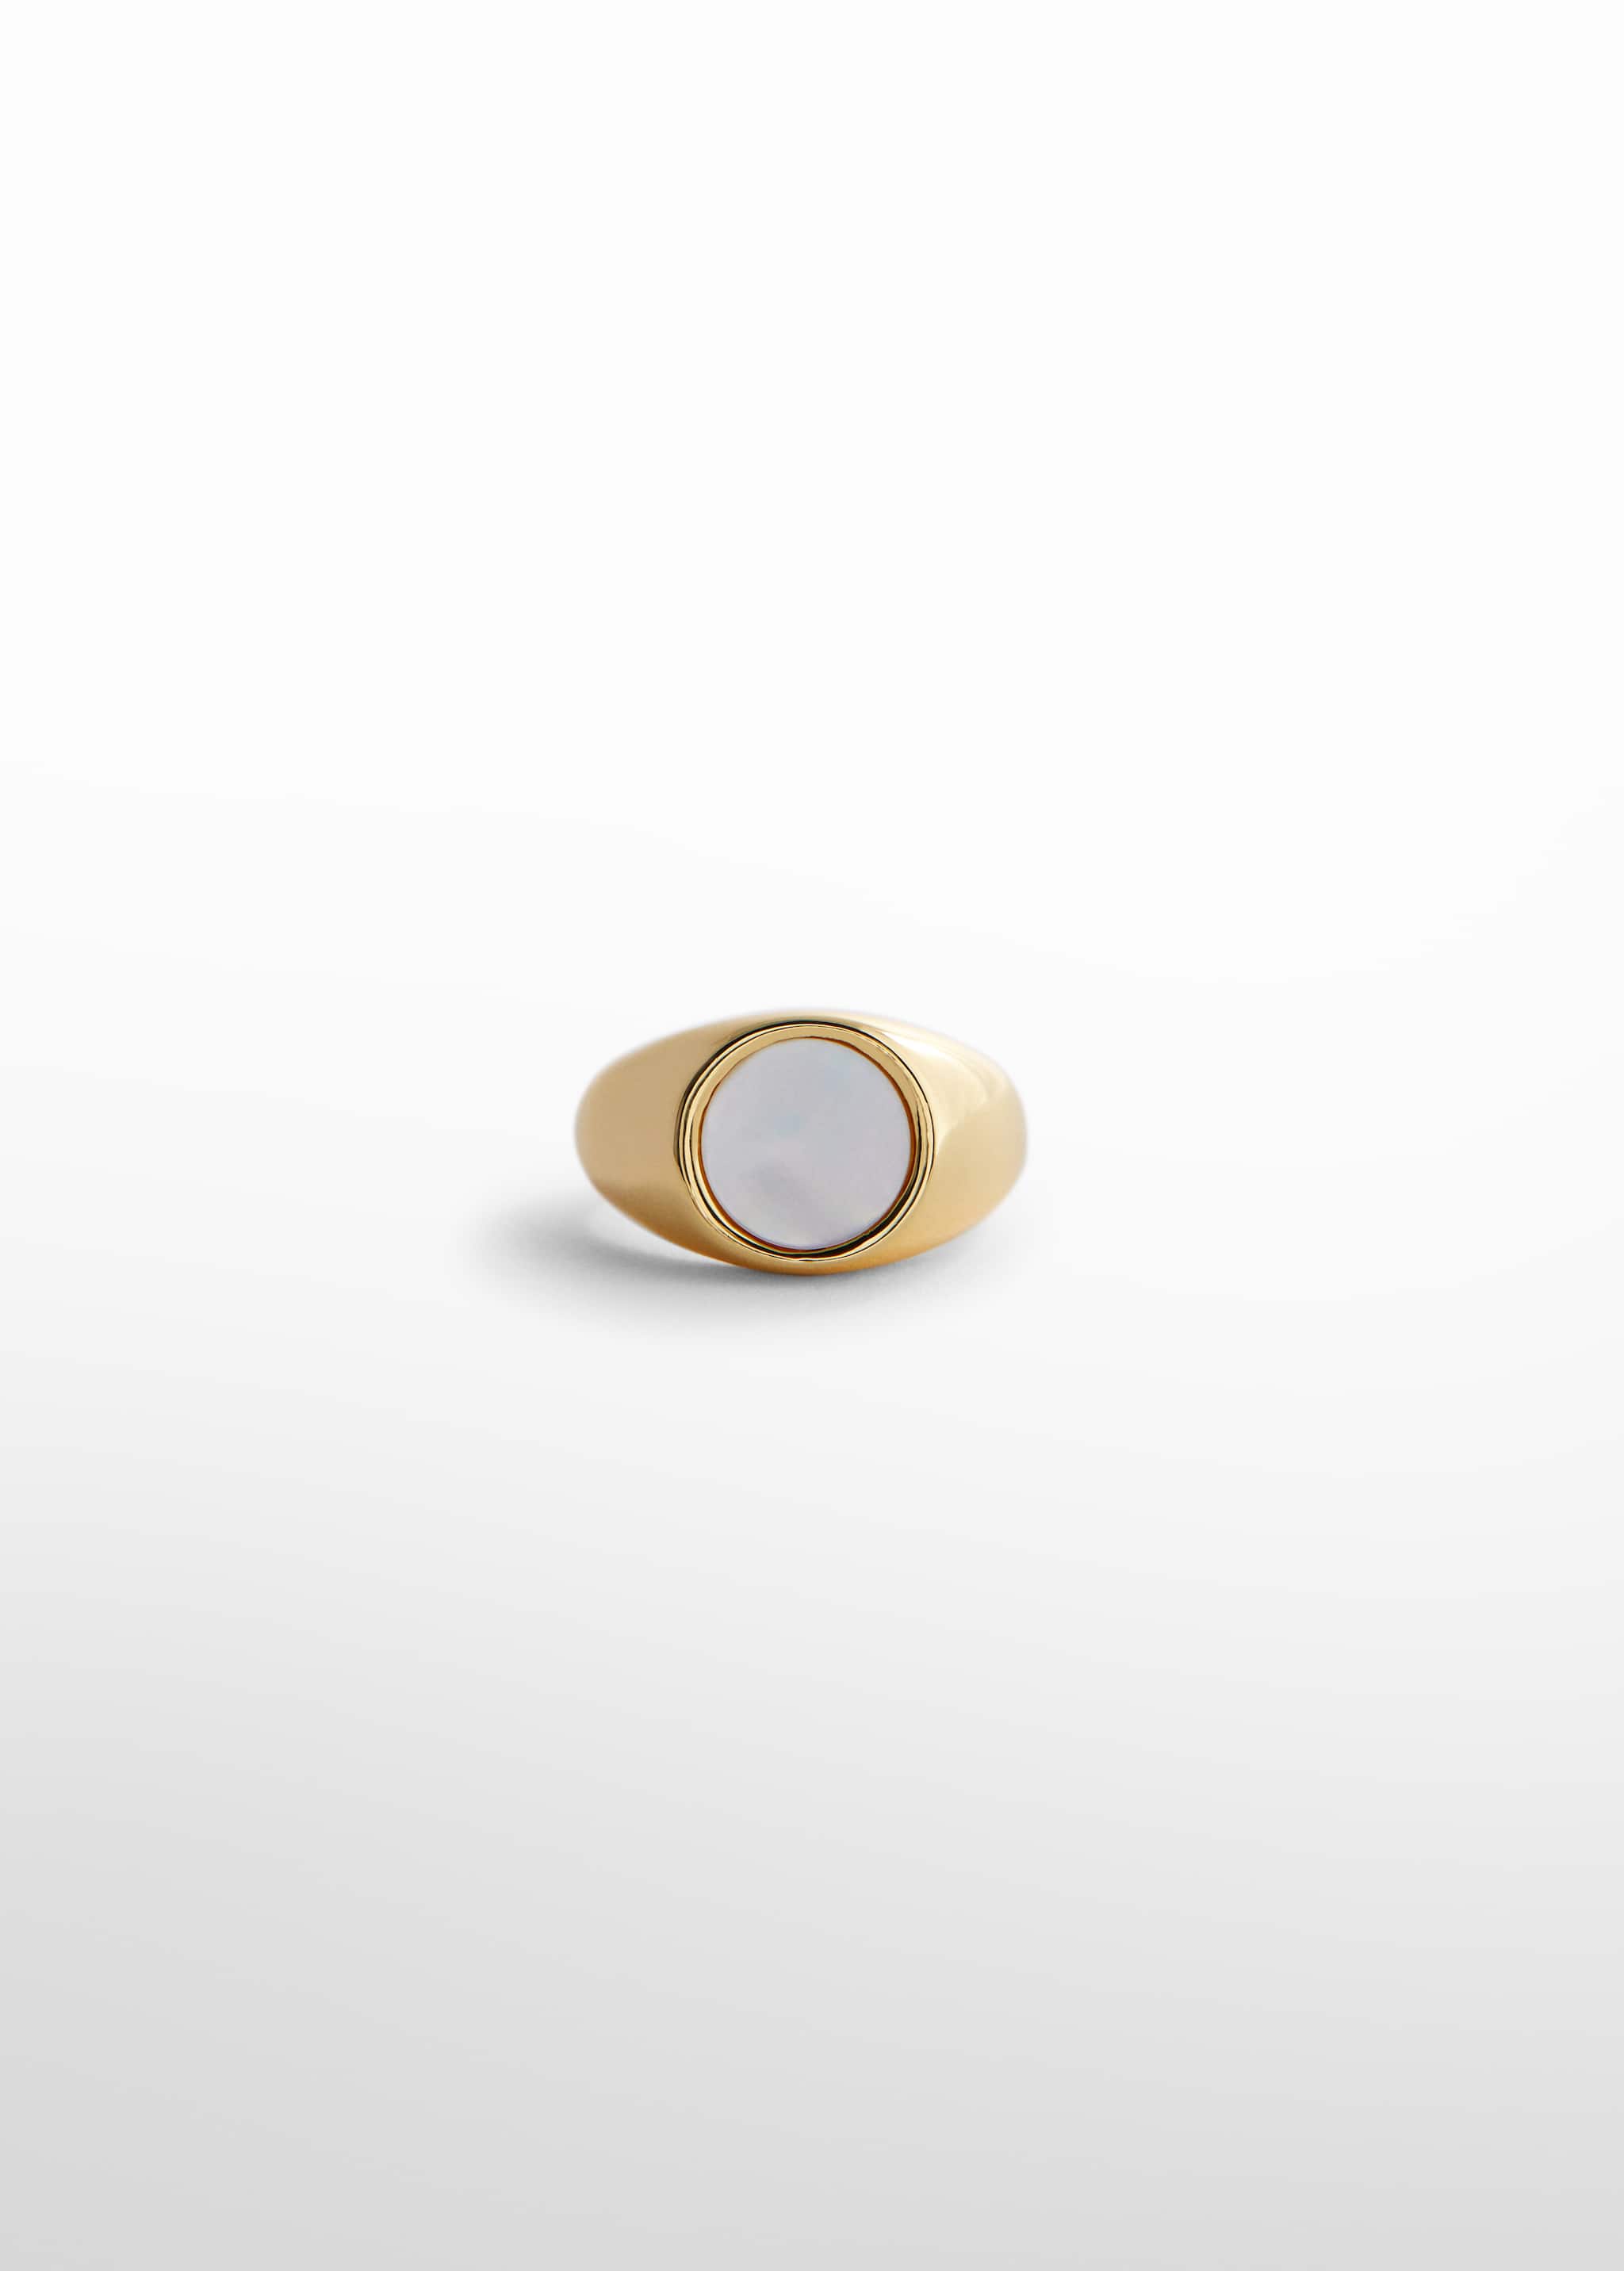 18K signet ring - Article without model